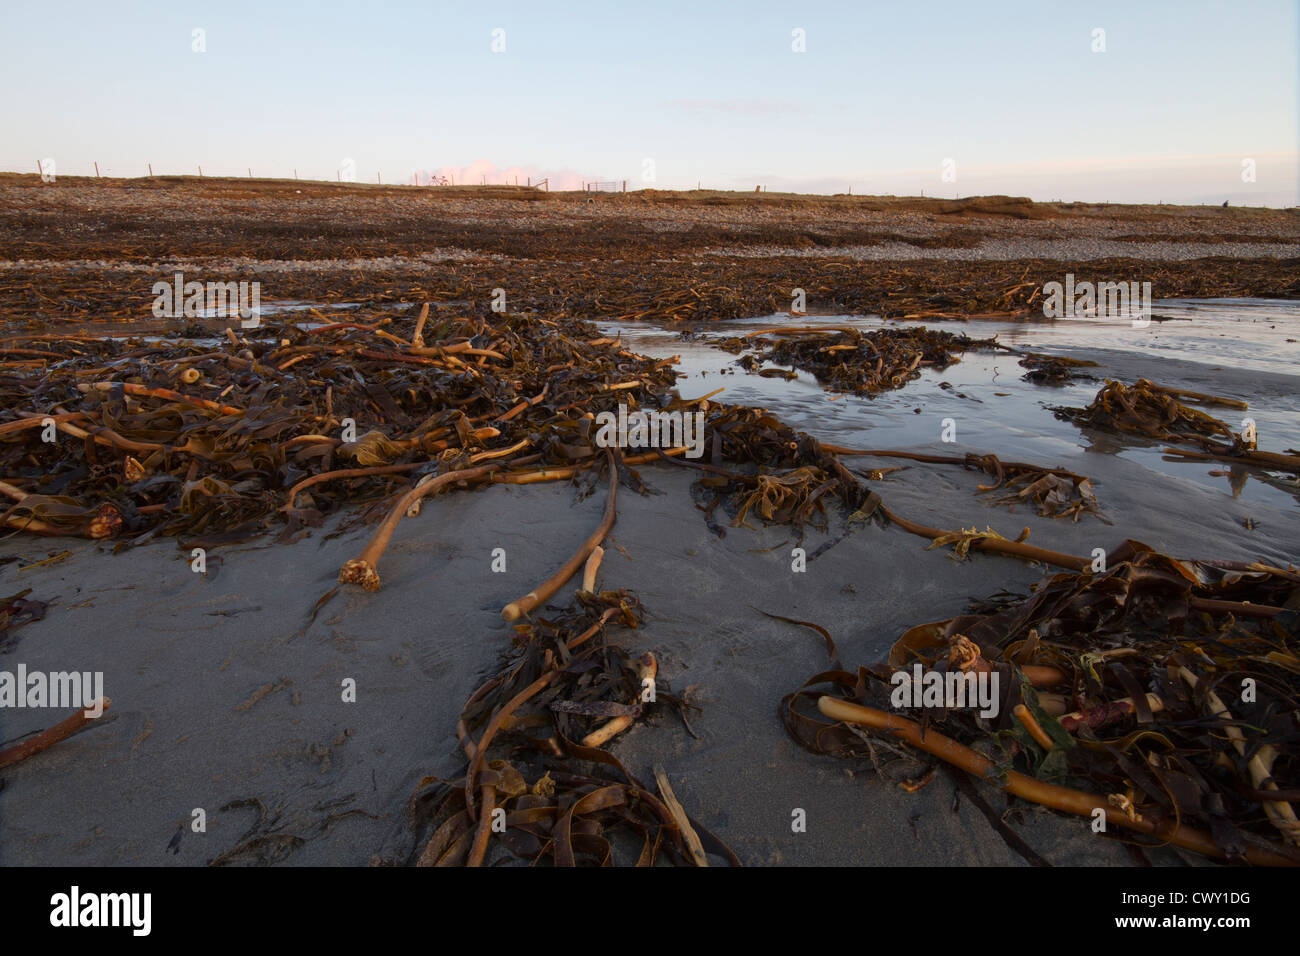 Kelp seaweed washed up after a winter storm Stock Photo